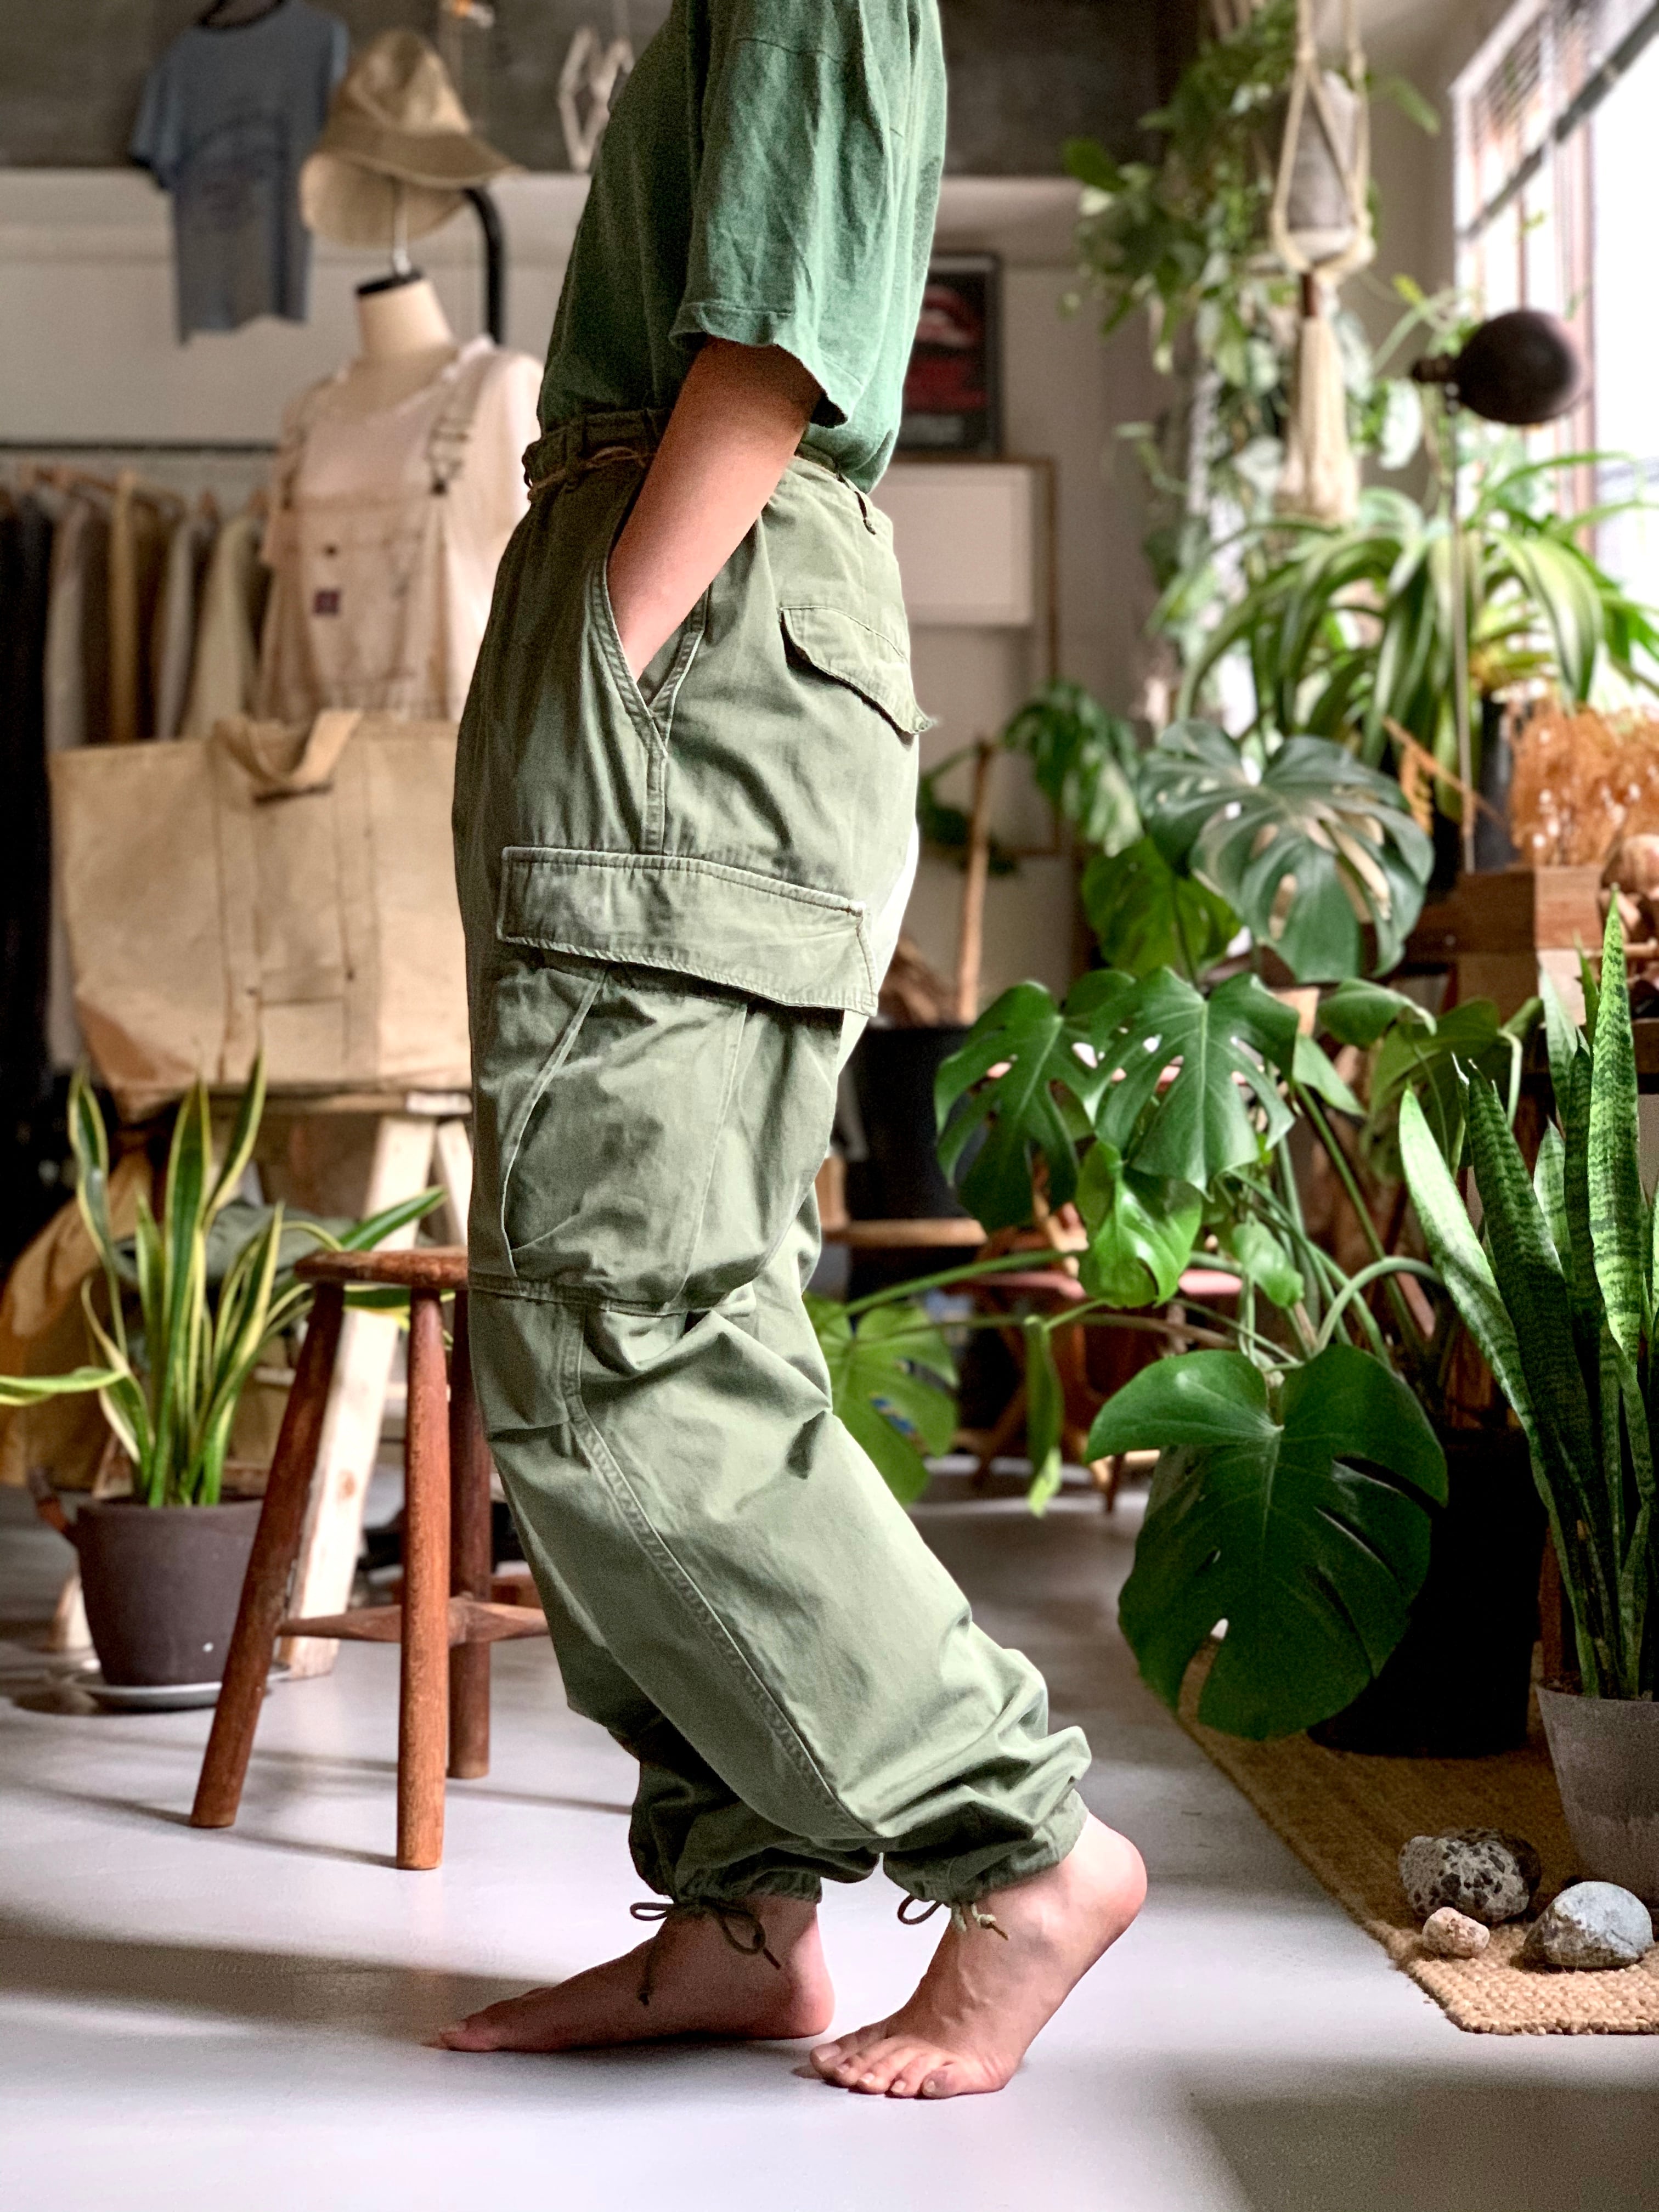 60's vintage “us army” “jungle fatigue pants” 3rd model “small